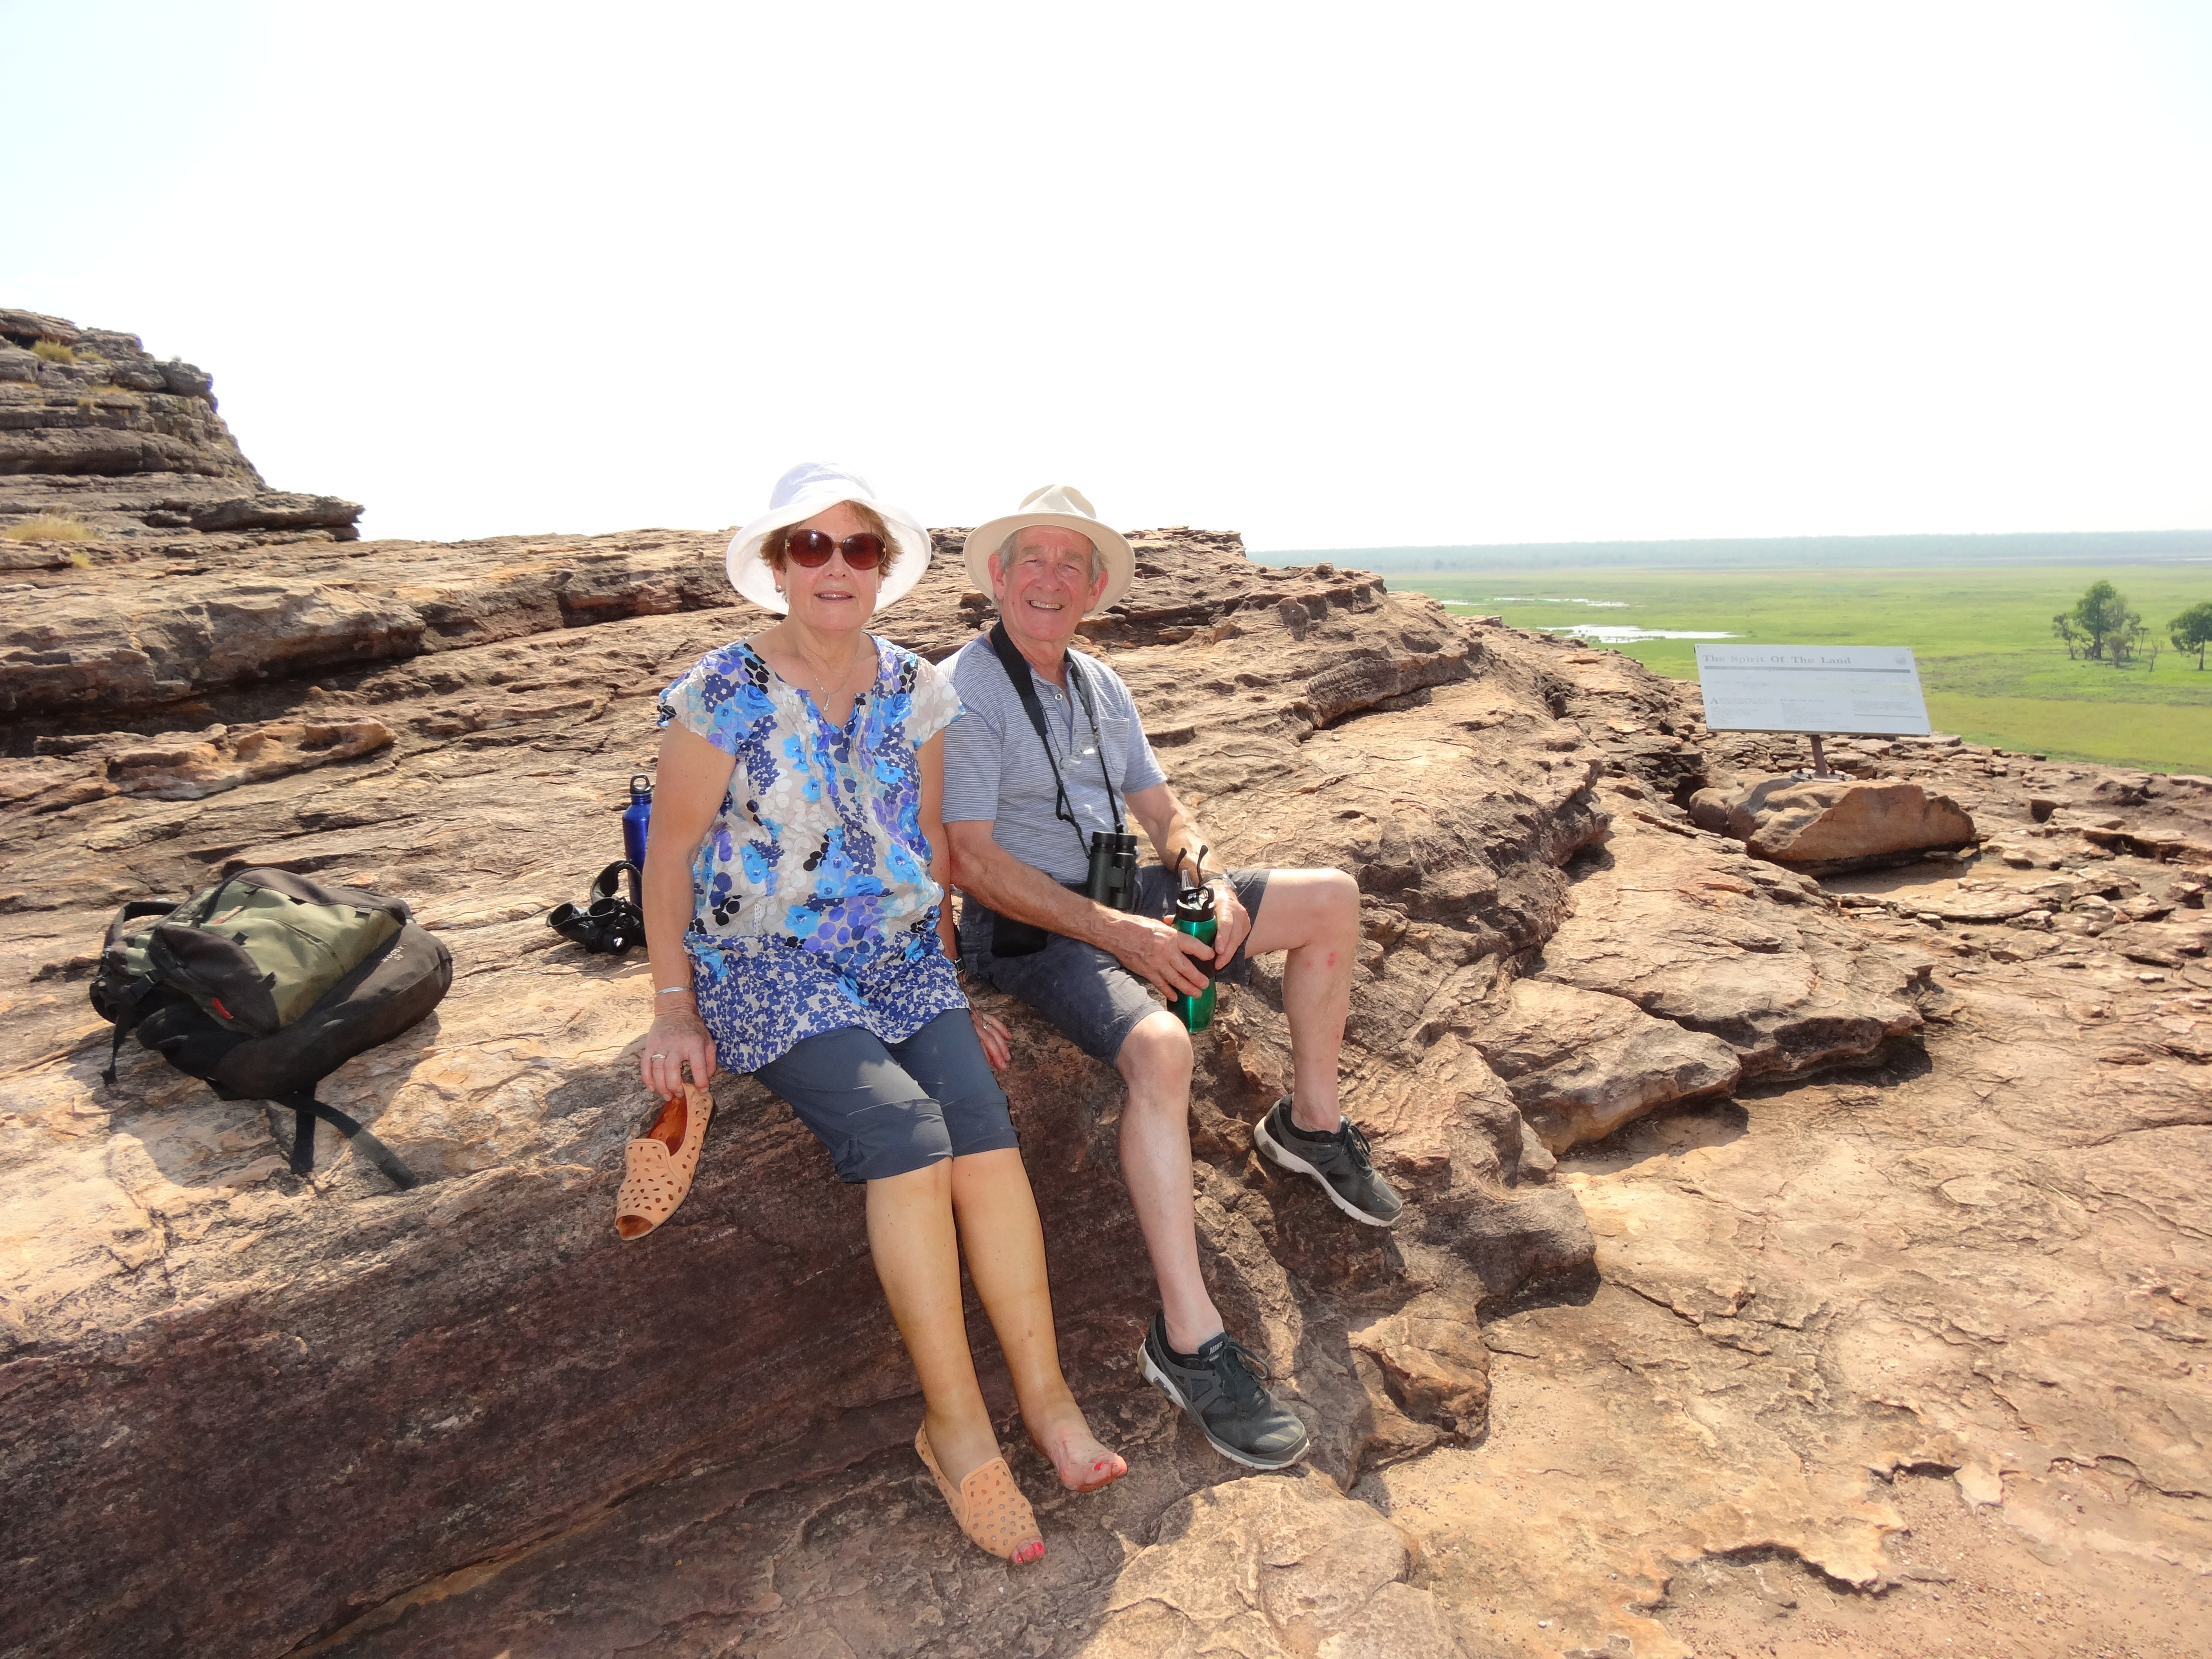 My guests Chris and Eileen on Nadab Lookout overlooking the floodplain